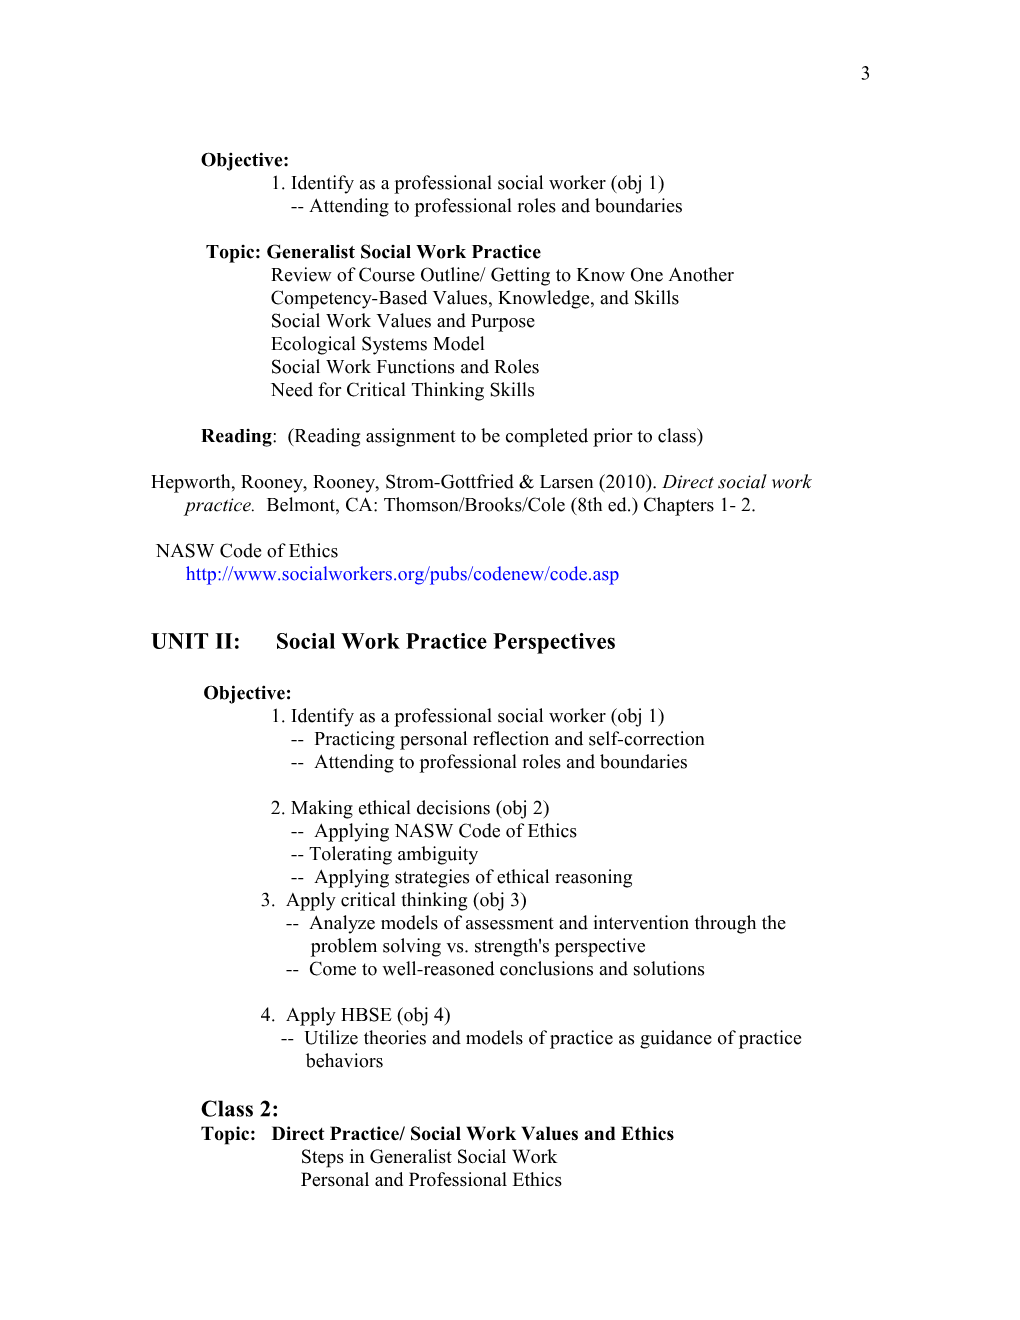 SOWK 7301 Foundations Of Social Work Practice I Syllabus Fall 2013 Rosalie Otters